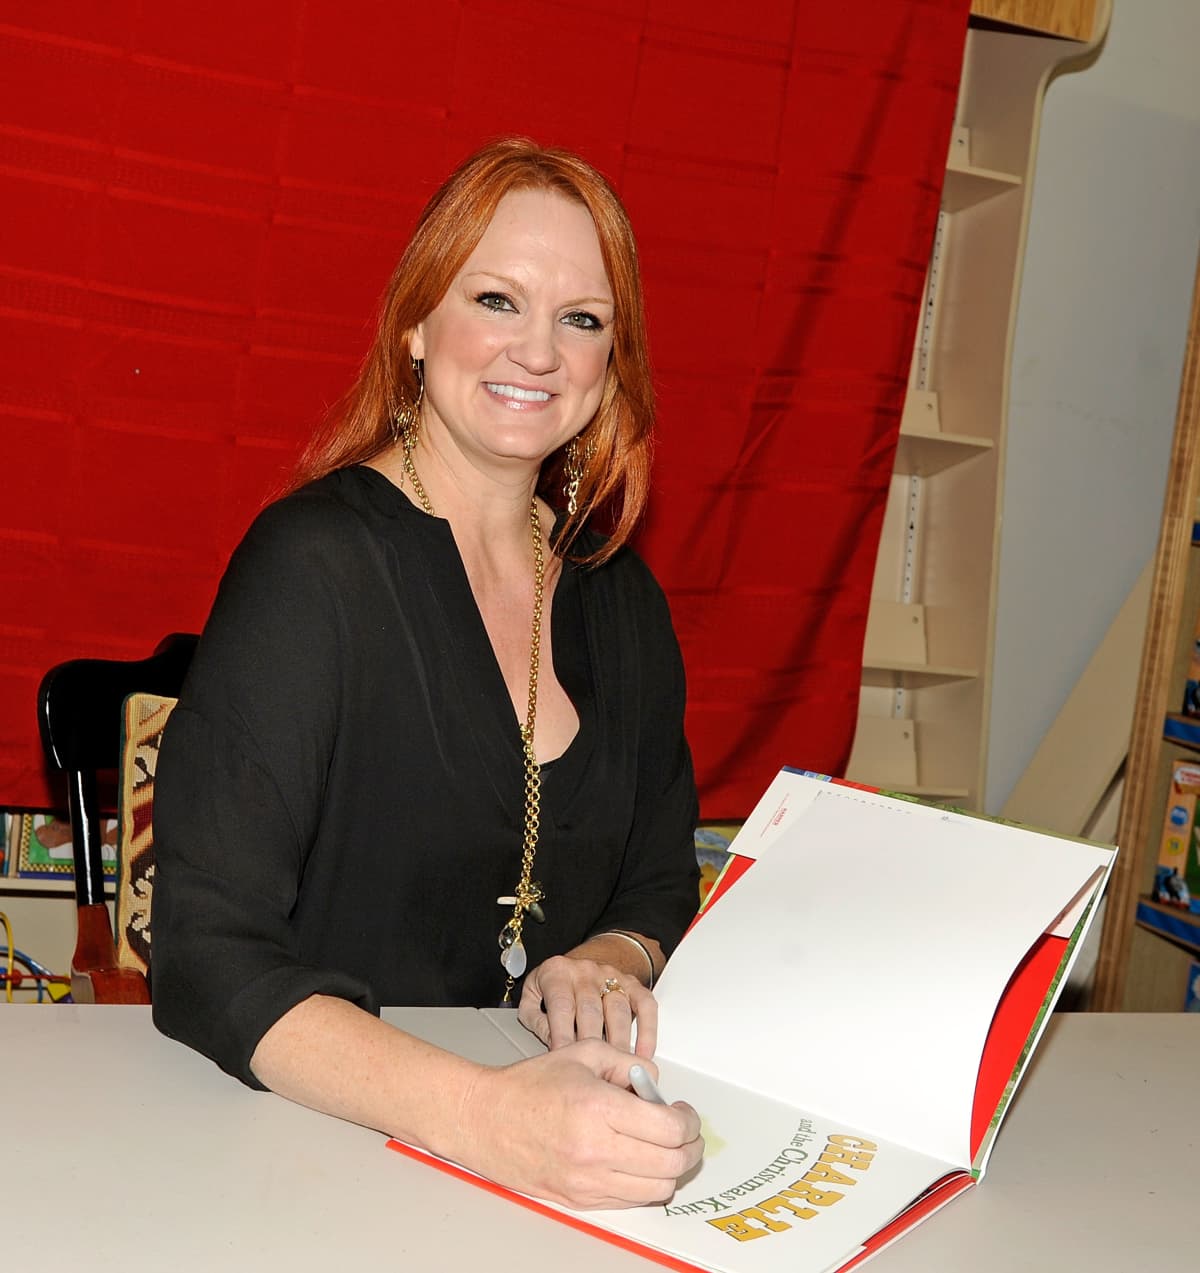 RIDGEWOOD, NJ - NOVEMBER 17:  Ree Drummond promotes the books "Charlie and The Christmas Kitty" and "The Pioneer Woman Cooks" at Bookends Bookstore on November 17, 2012 in Ridgewood, New Jersey.  (Photo by Bobby Bank/Getty Images)